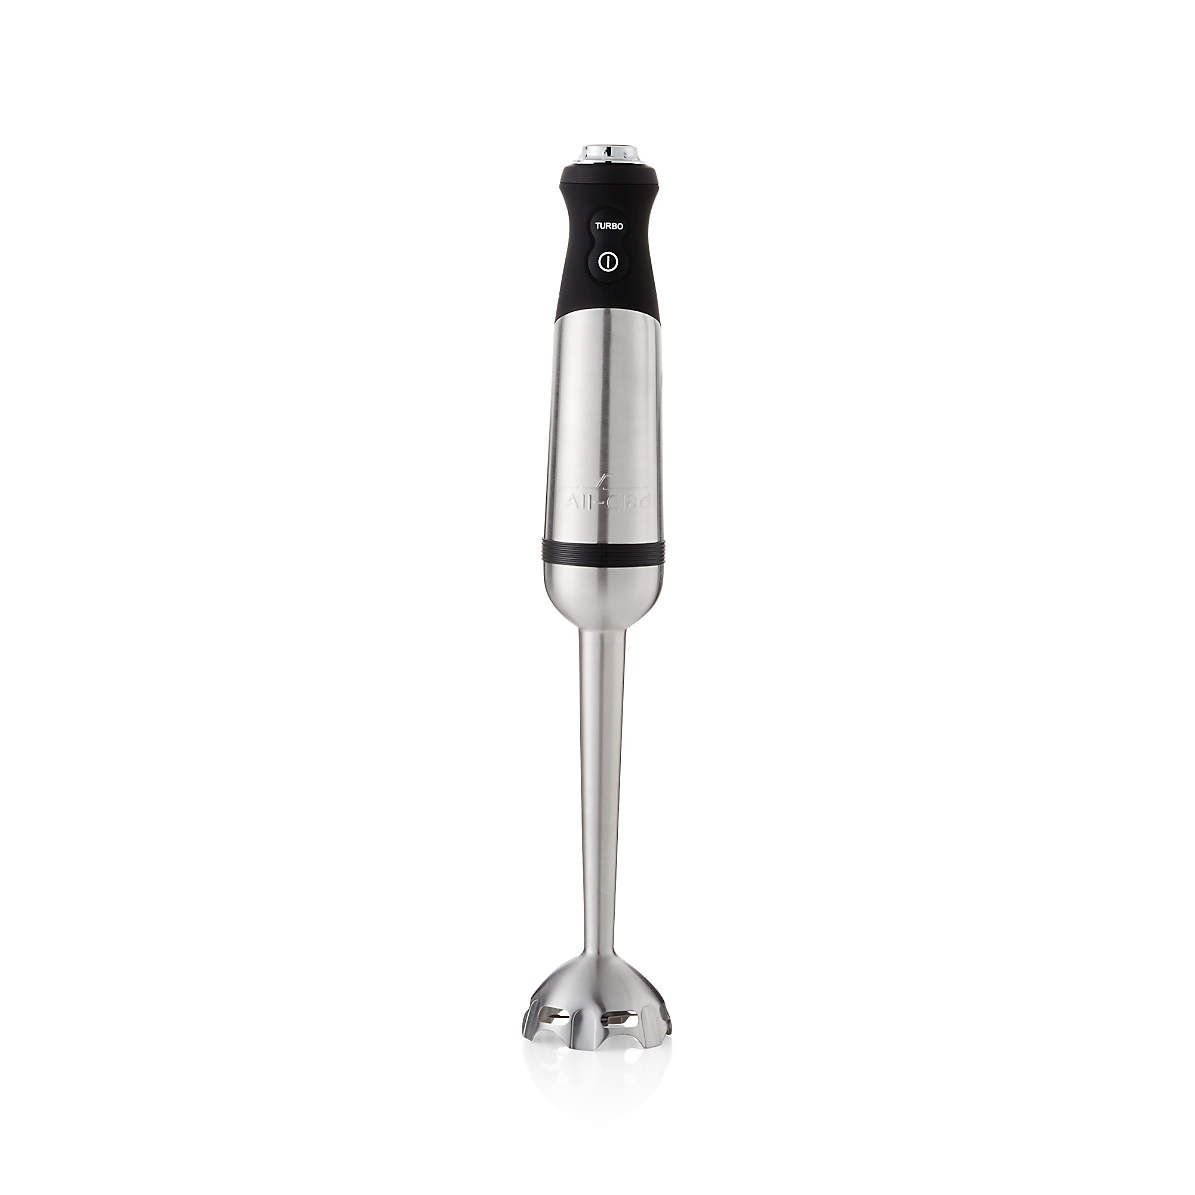 All-Clad KZ750D Immersion Blender Hands On Review